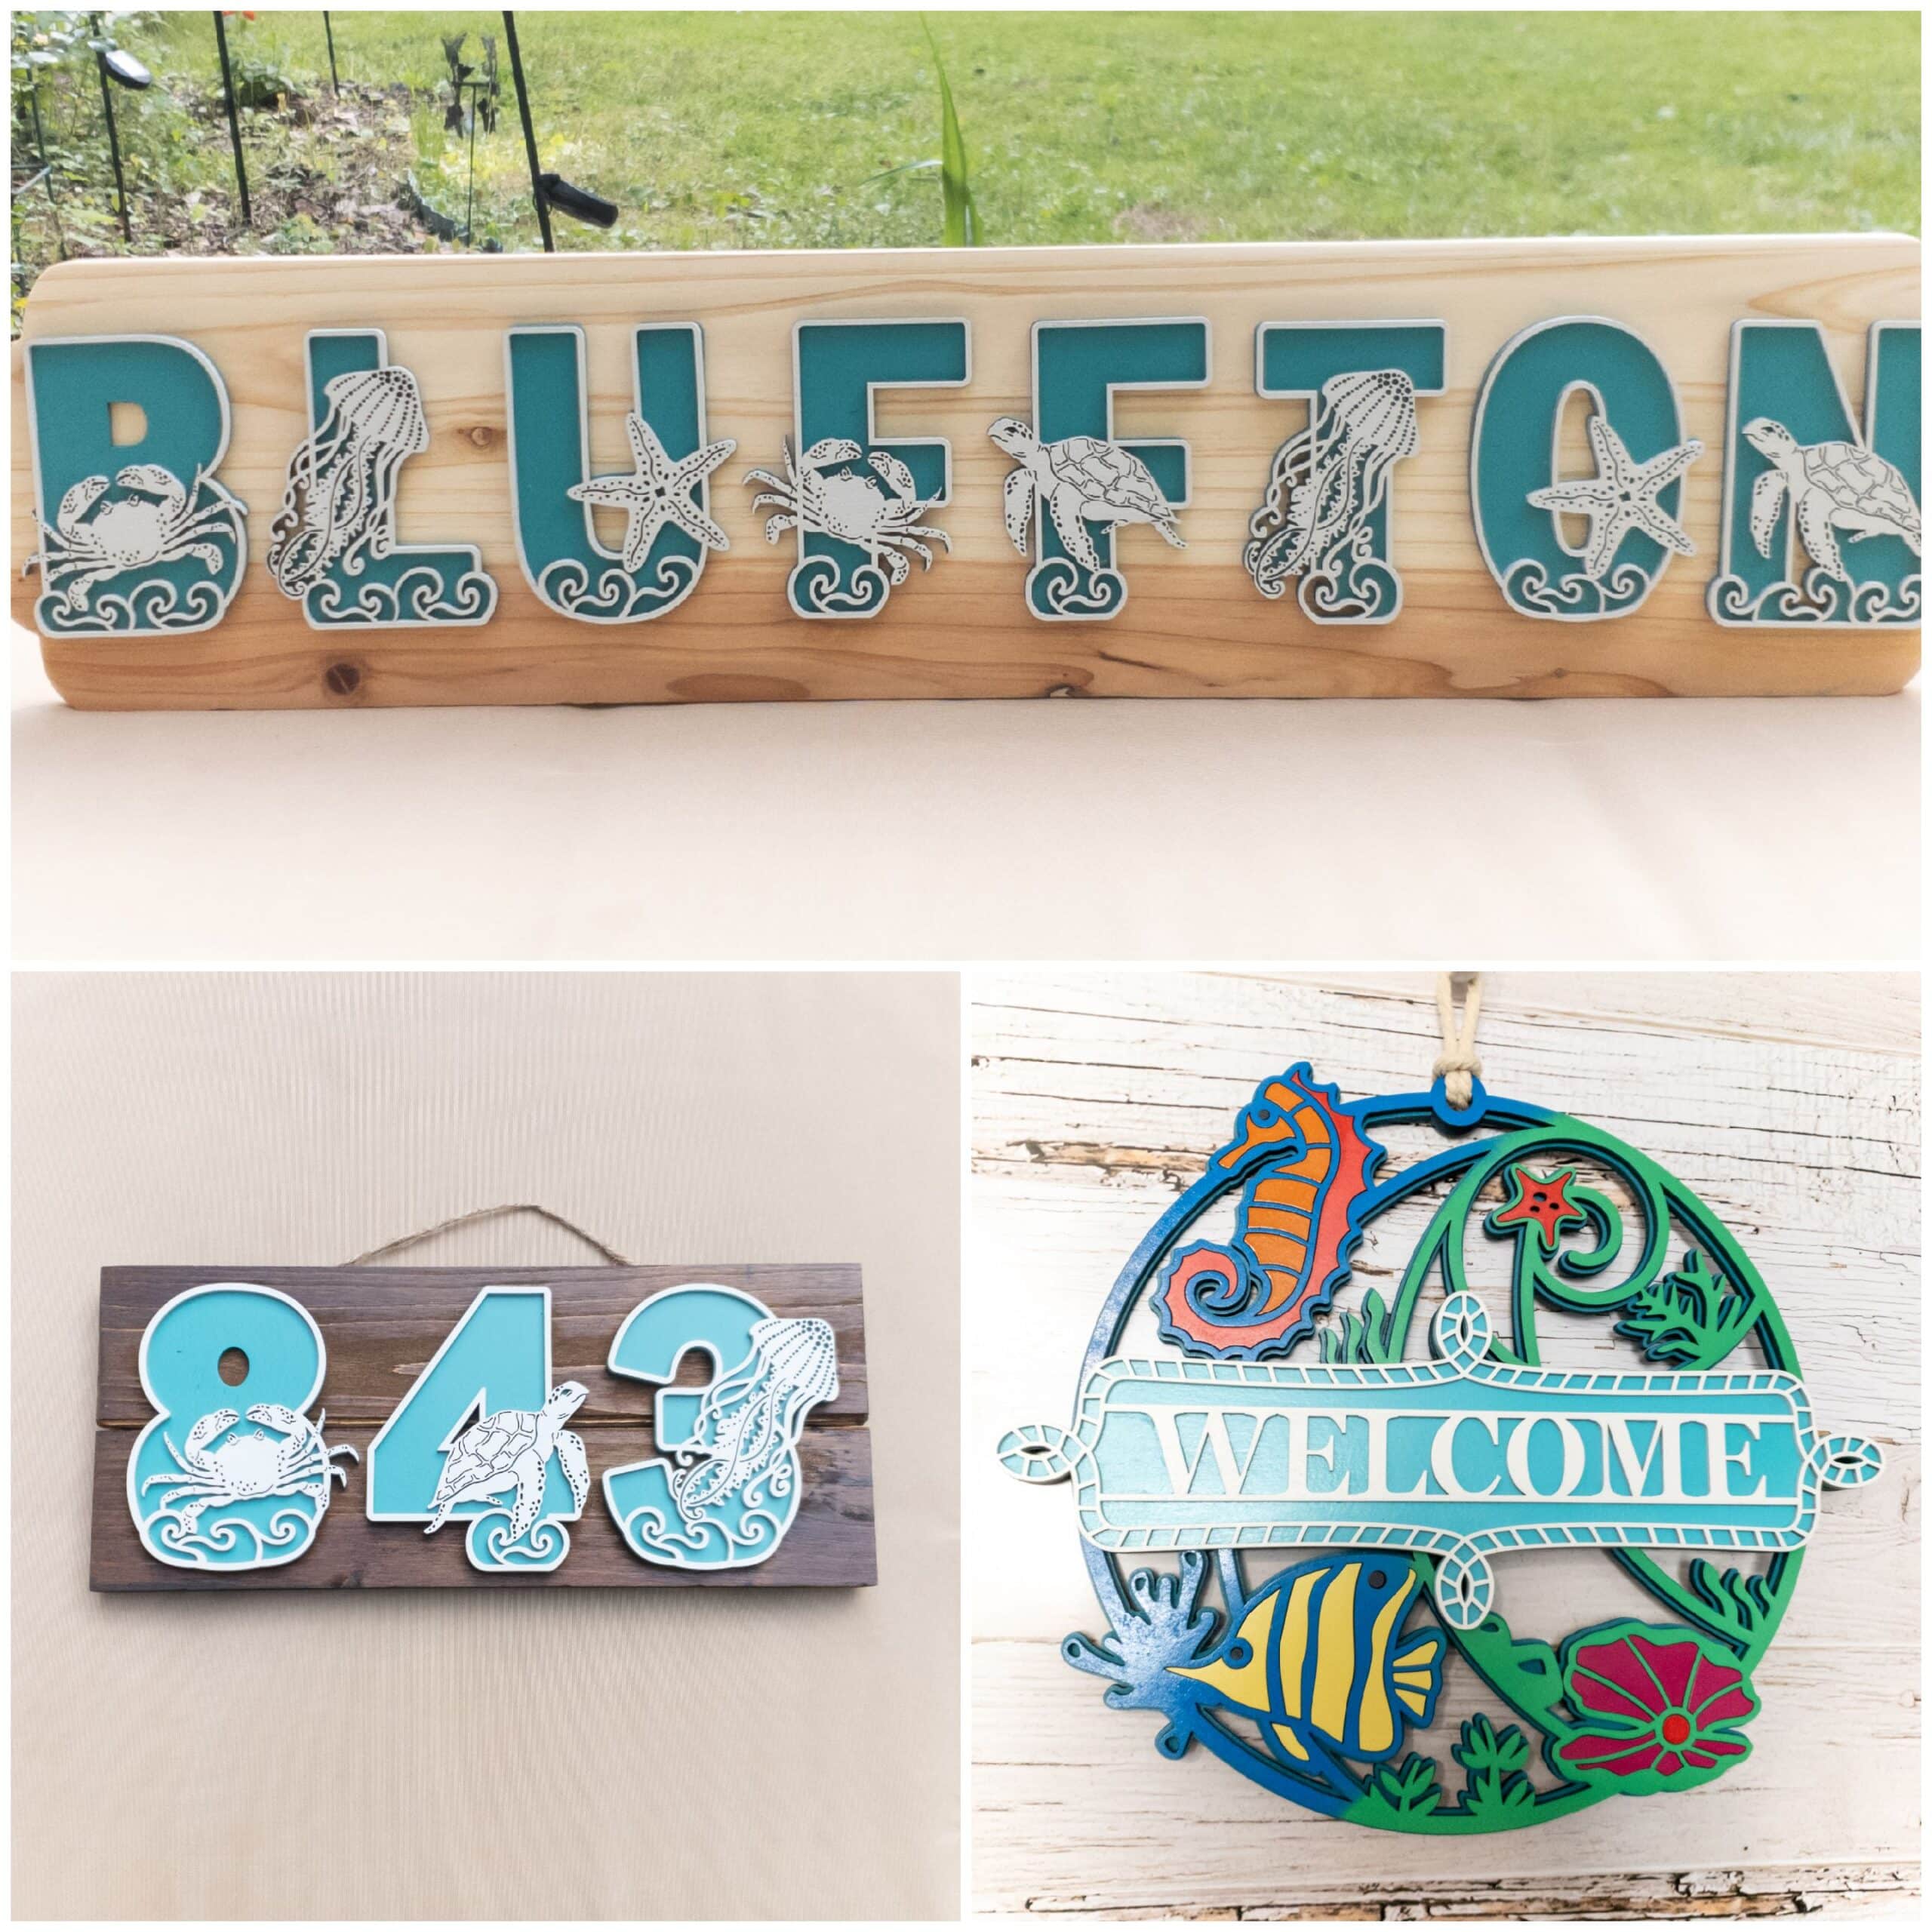 sprouting expressions bluffton decor